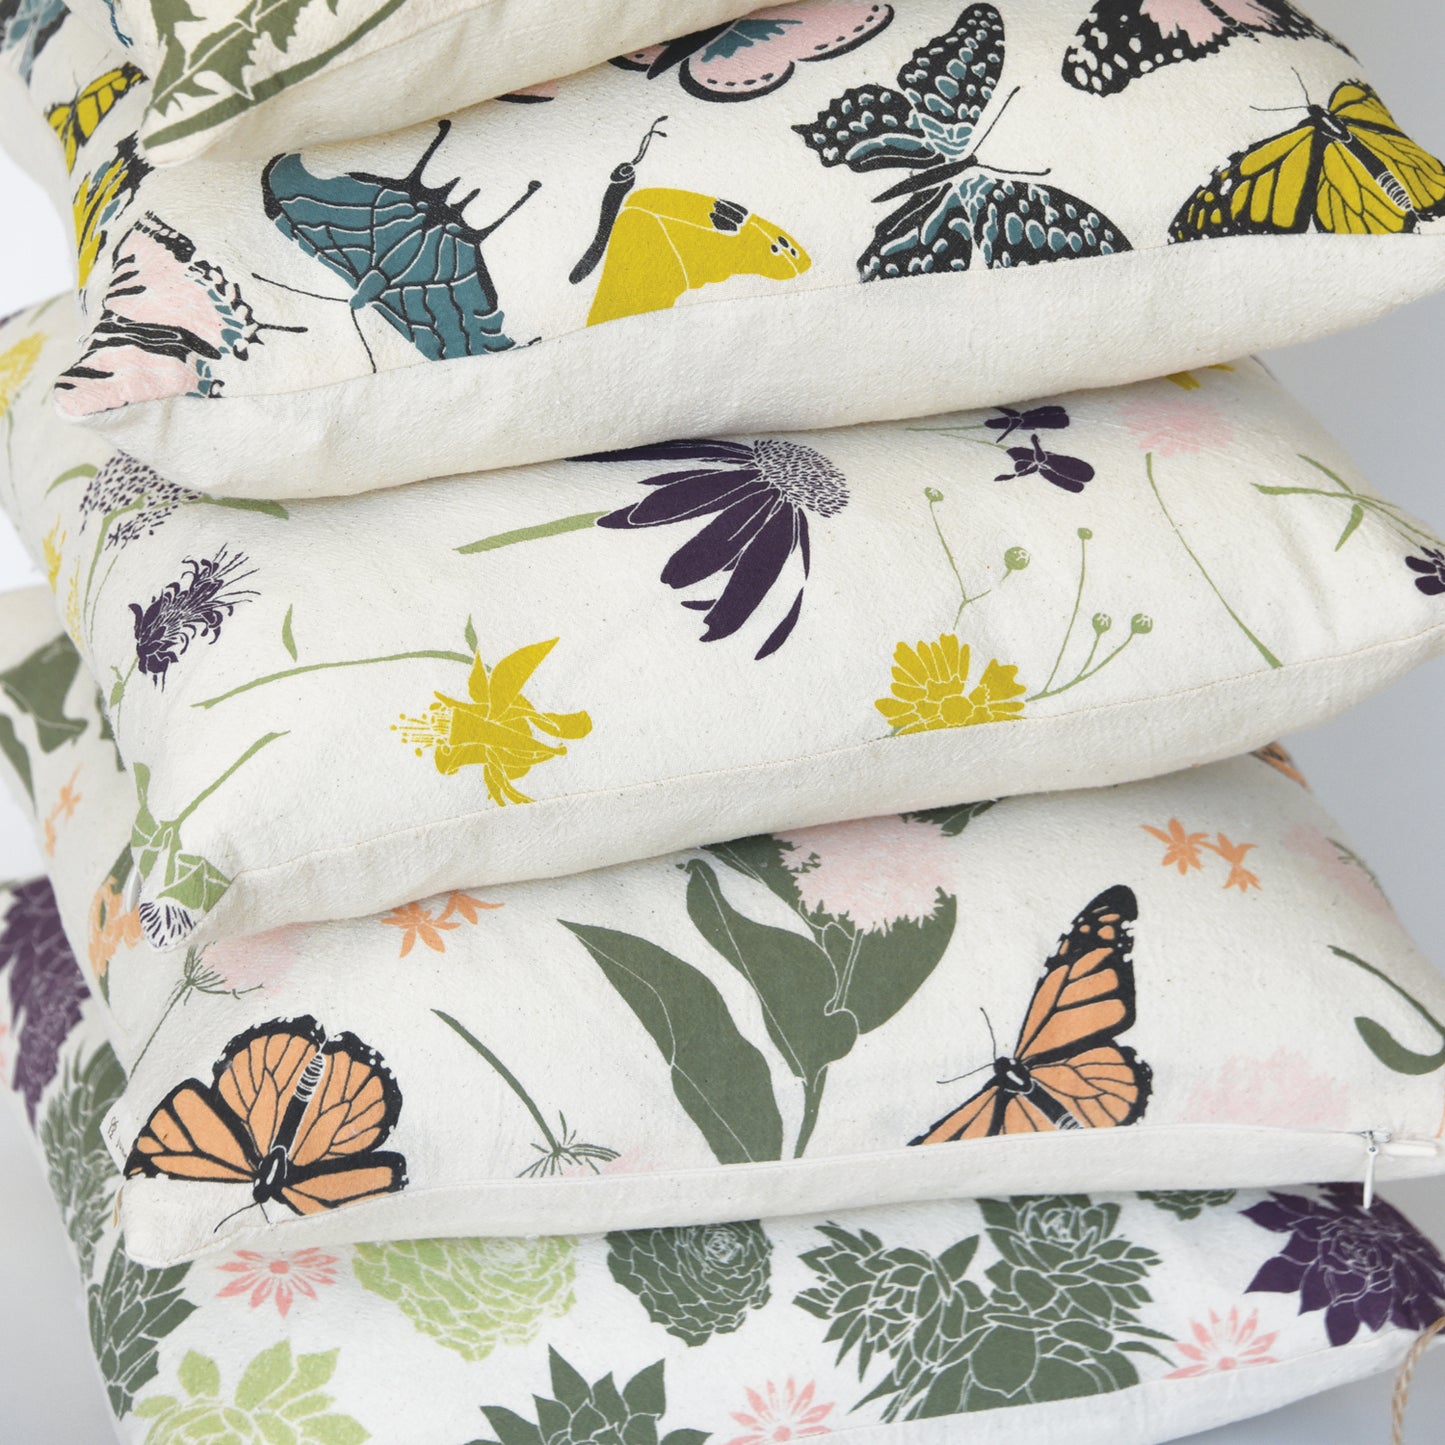 Forest Finds Pillow Cover